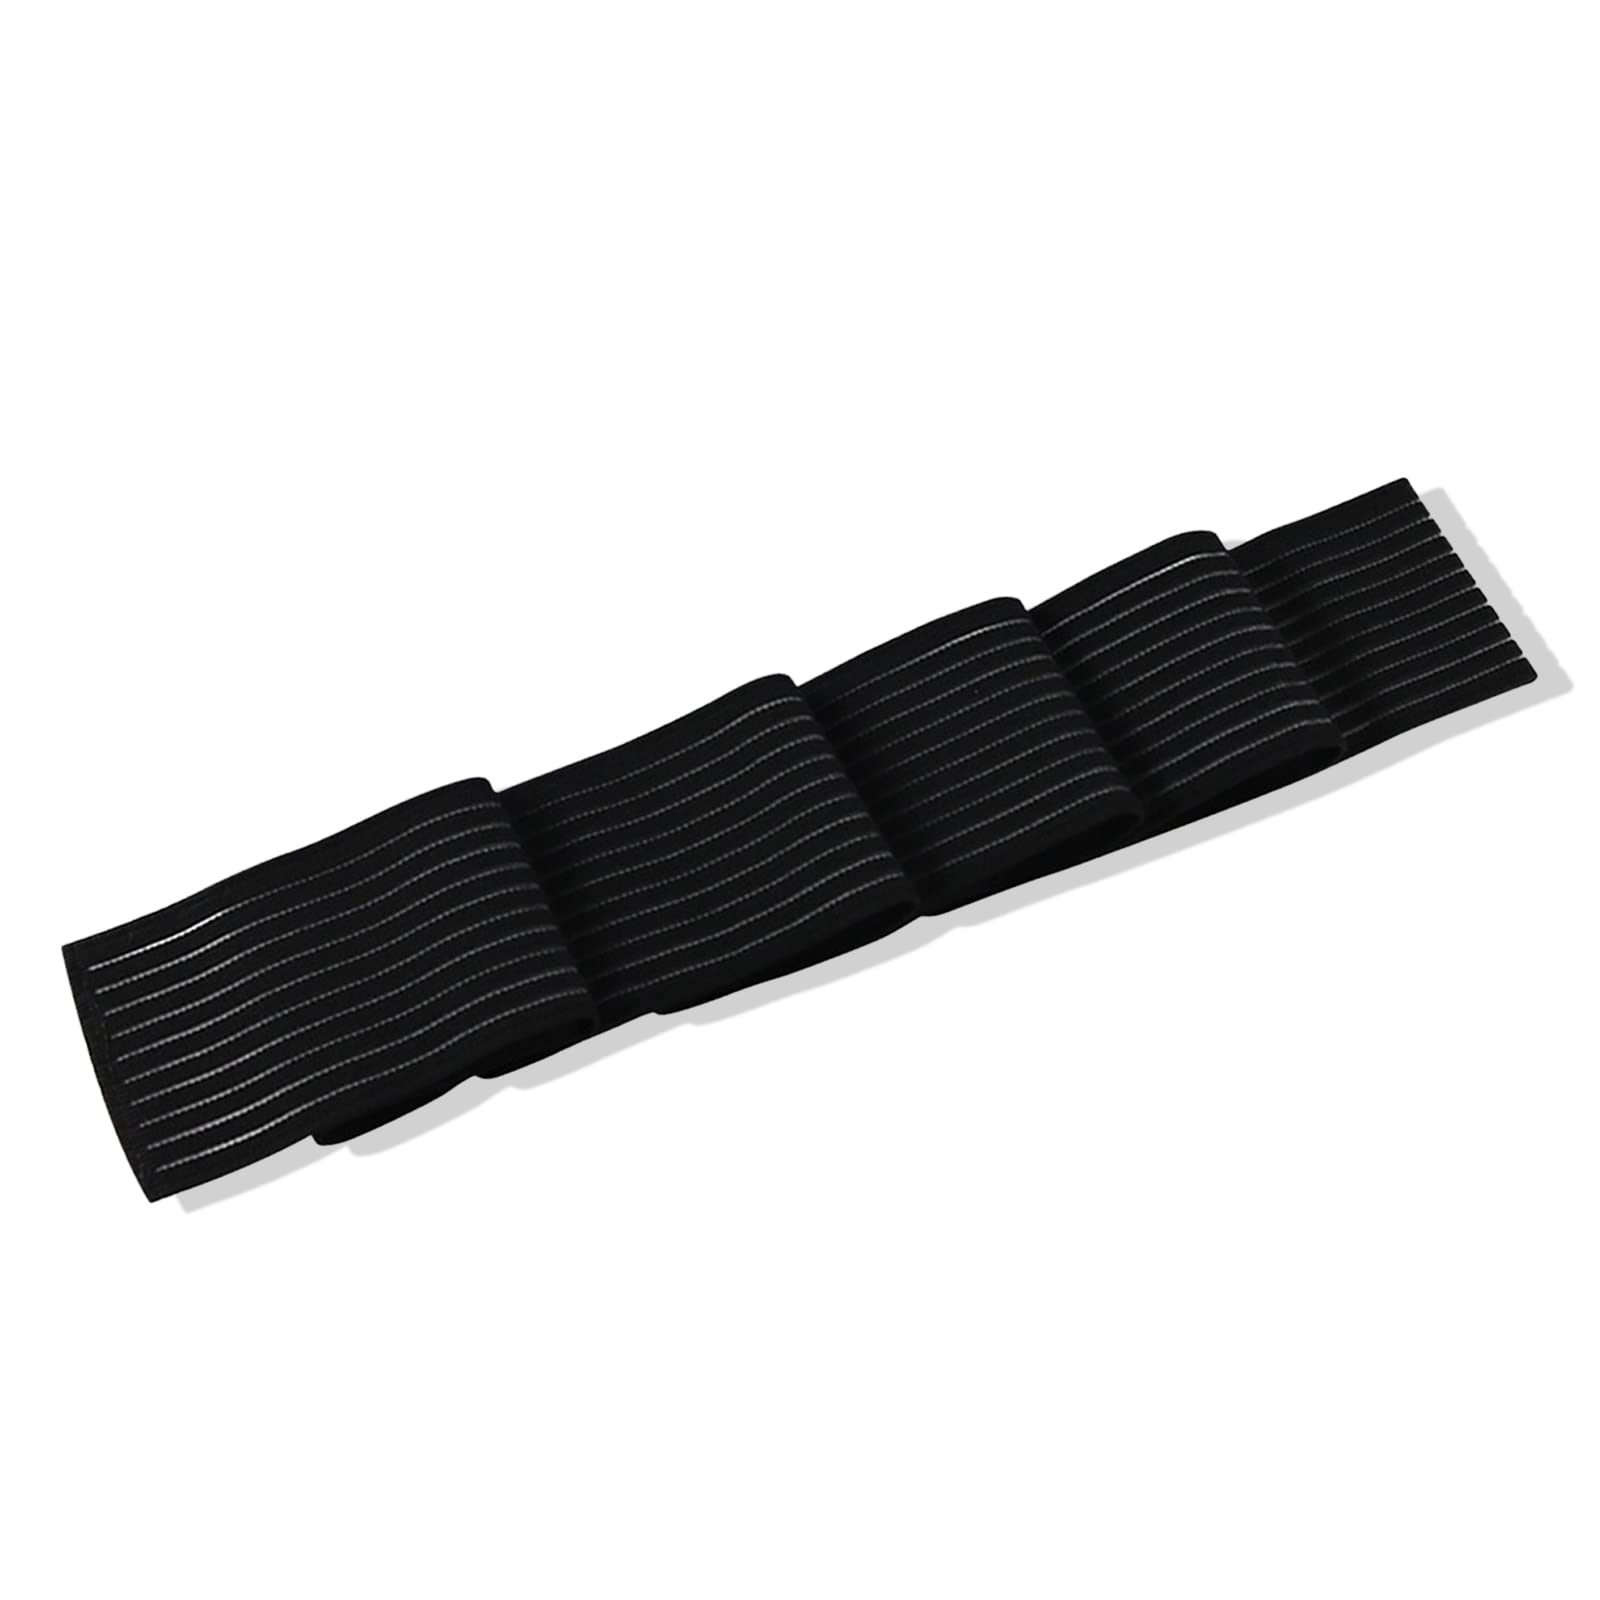 Breast Support Band, Black